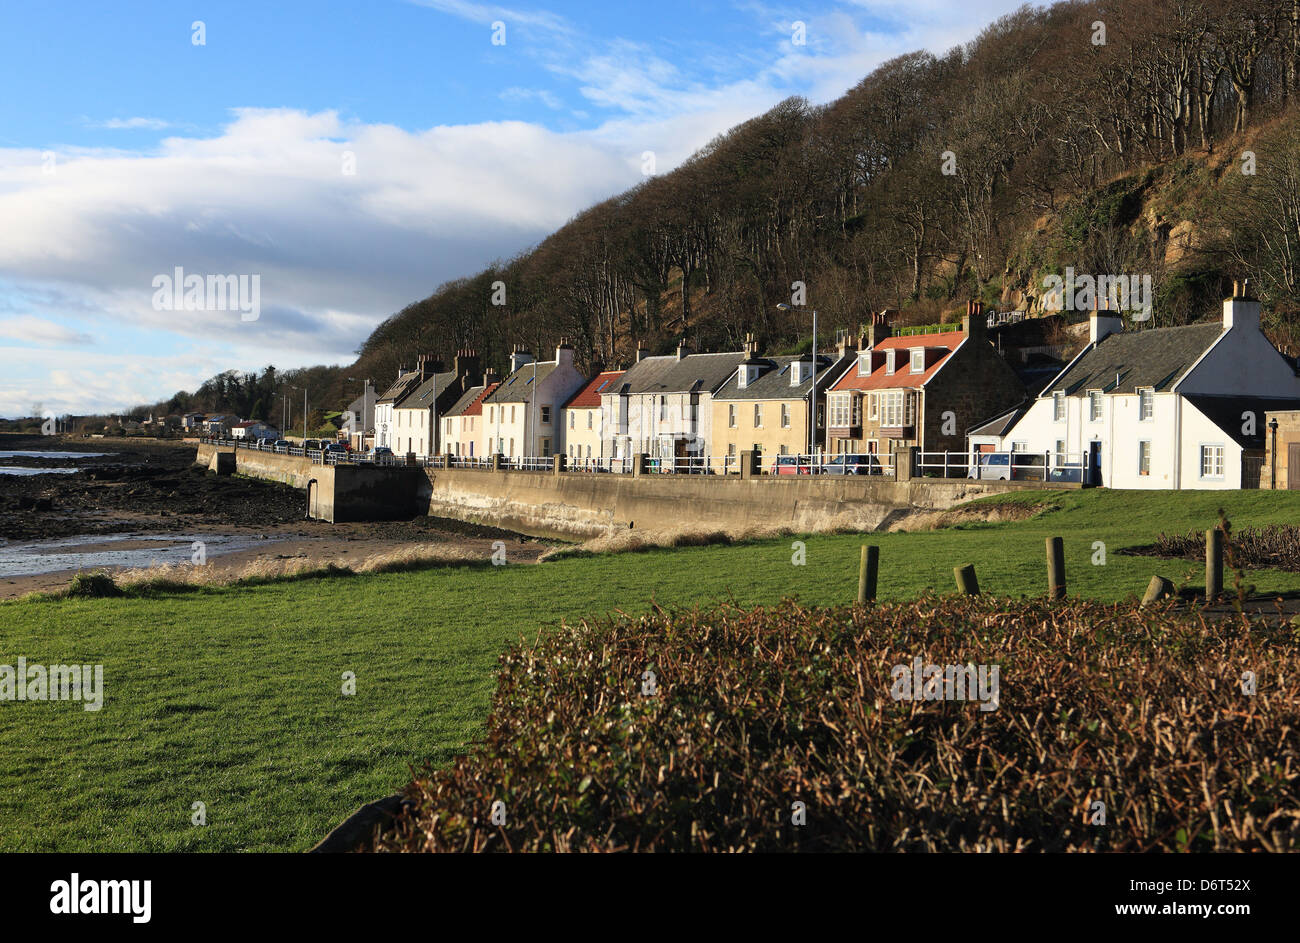 Row of houses in Limekilns, a Fife coastal town which looks onto the Firth of Forth in Scotland Stock Photo